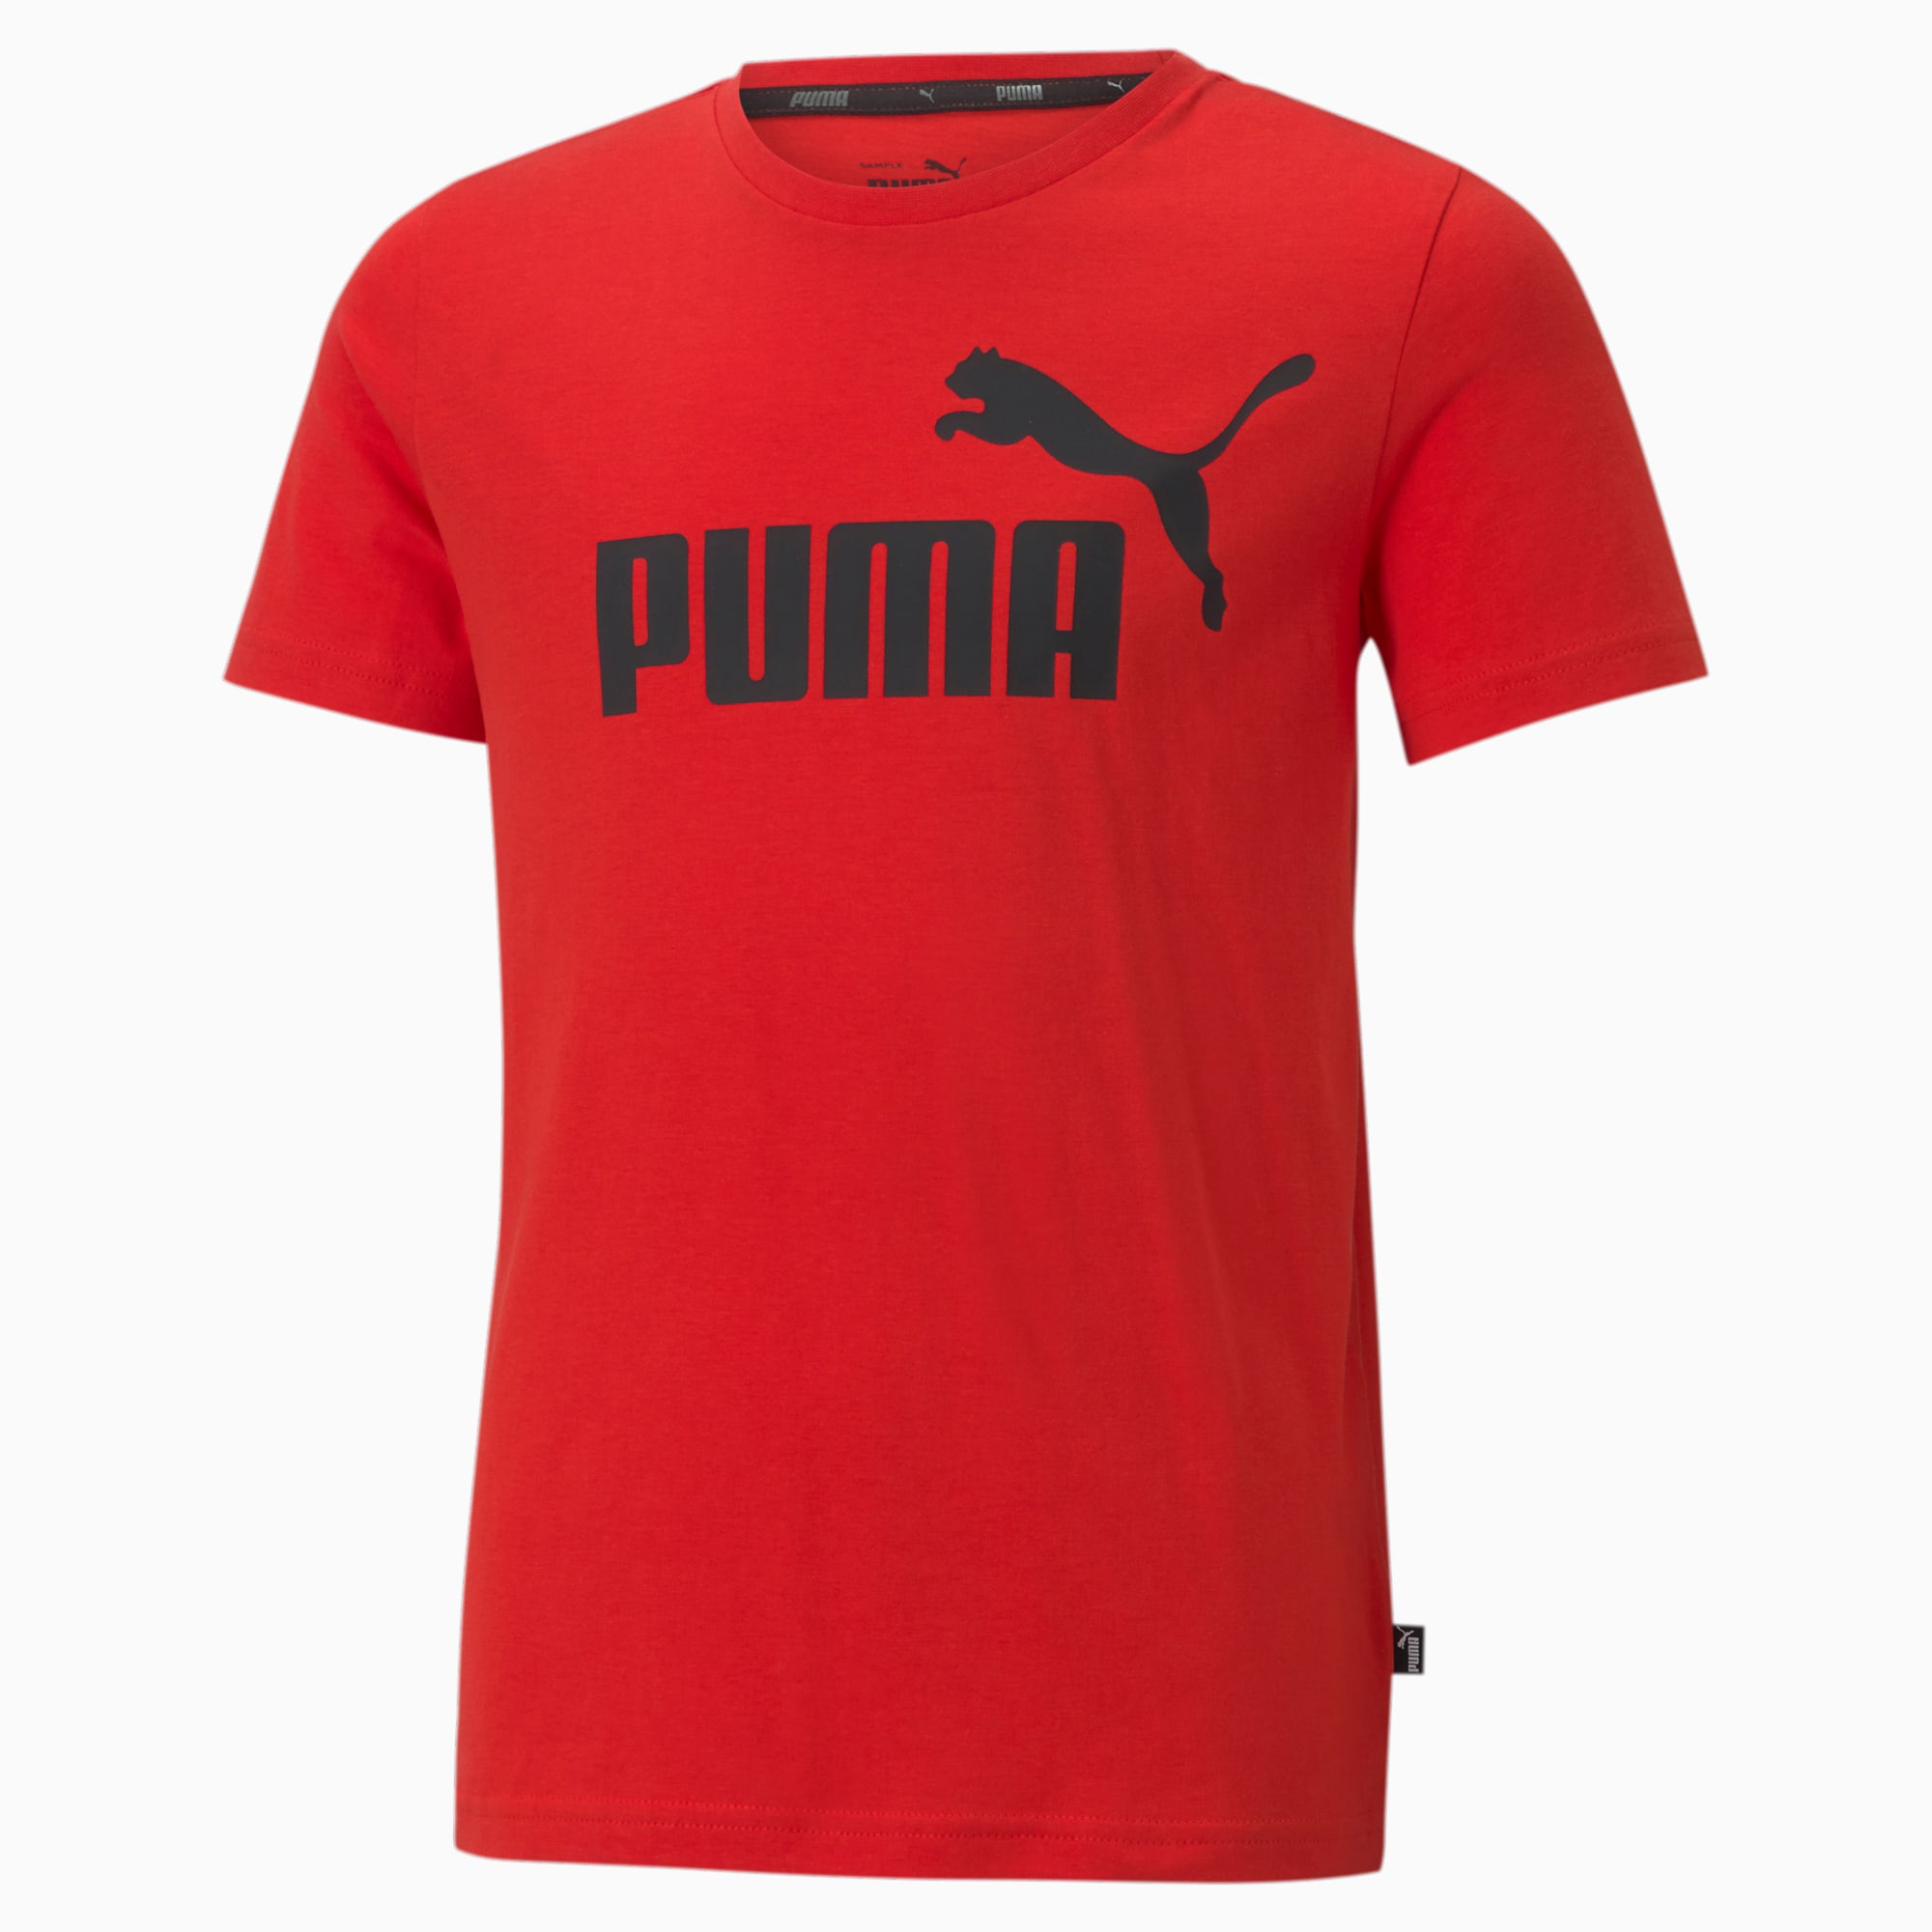 PUMA Essentials Logo Youth T-Shirt, High Risk Red, Size 92, Clothing